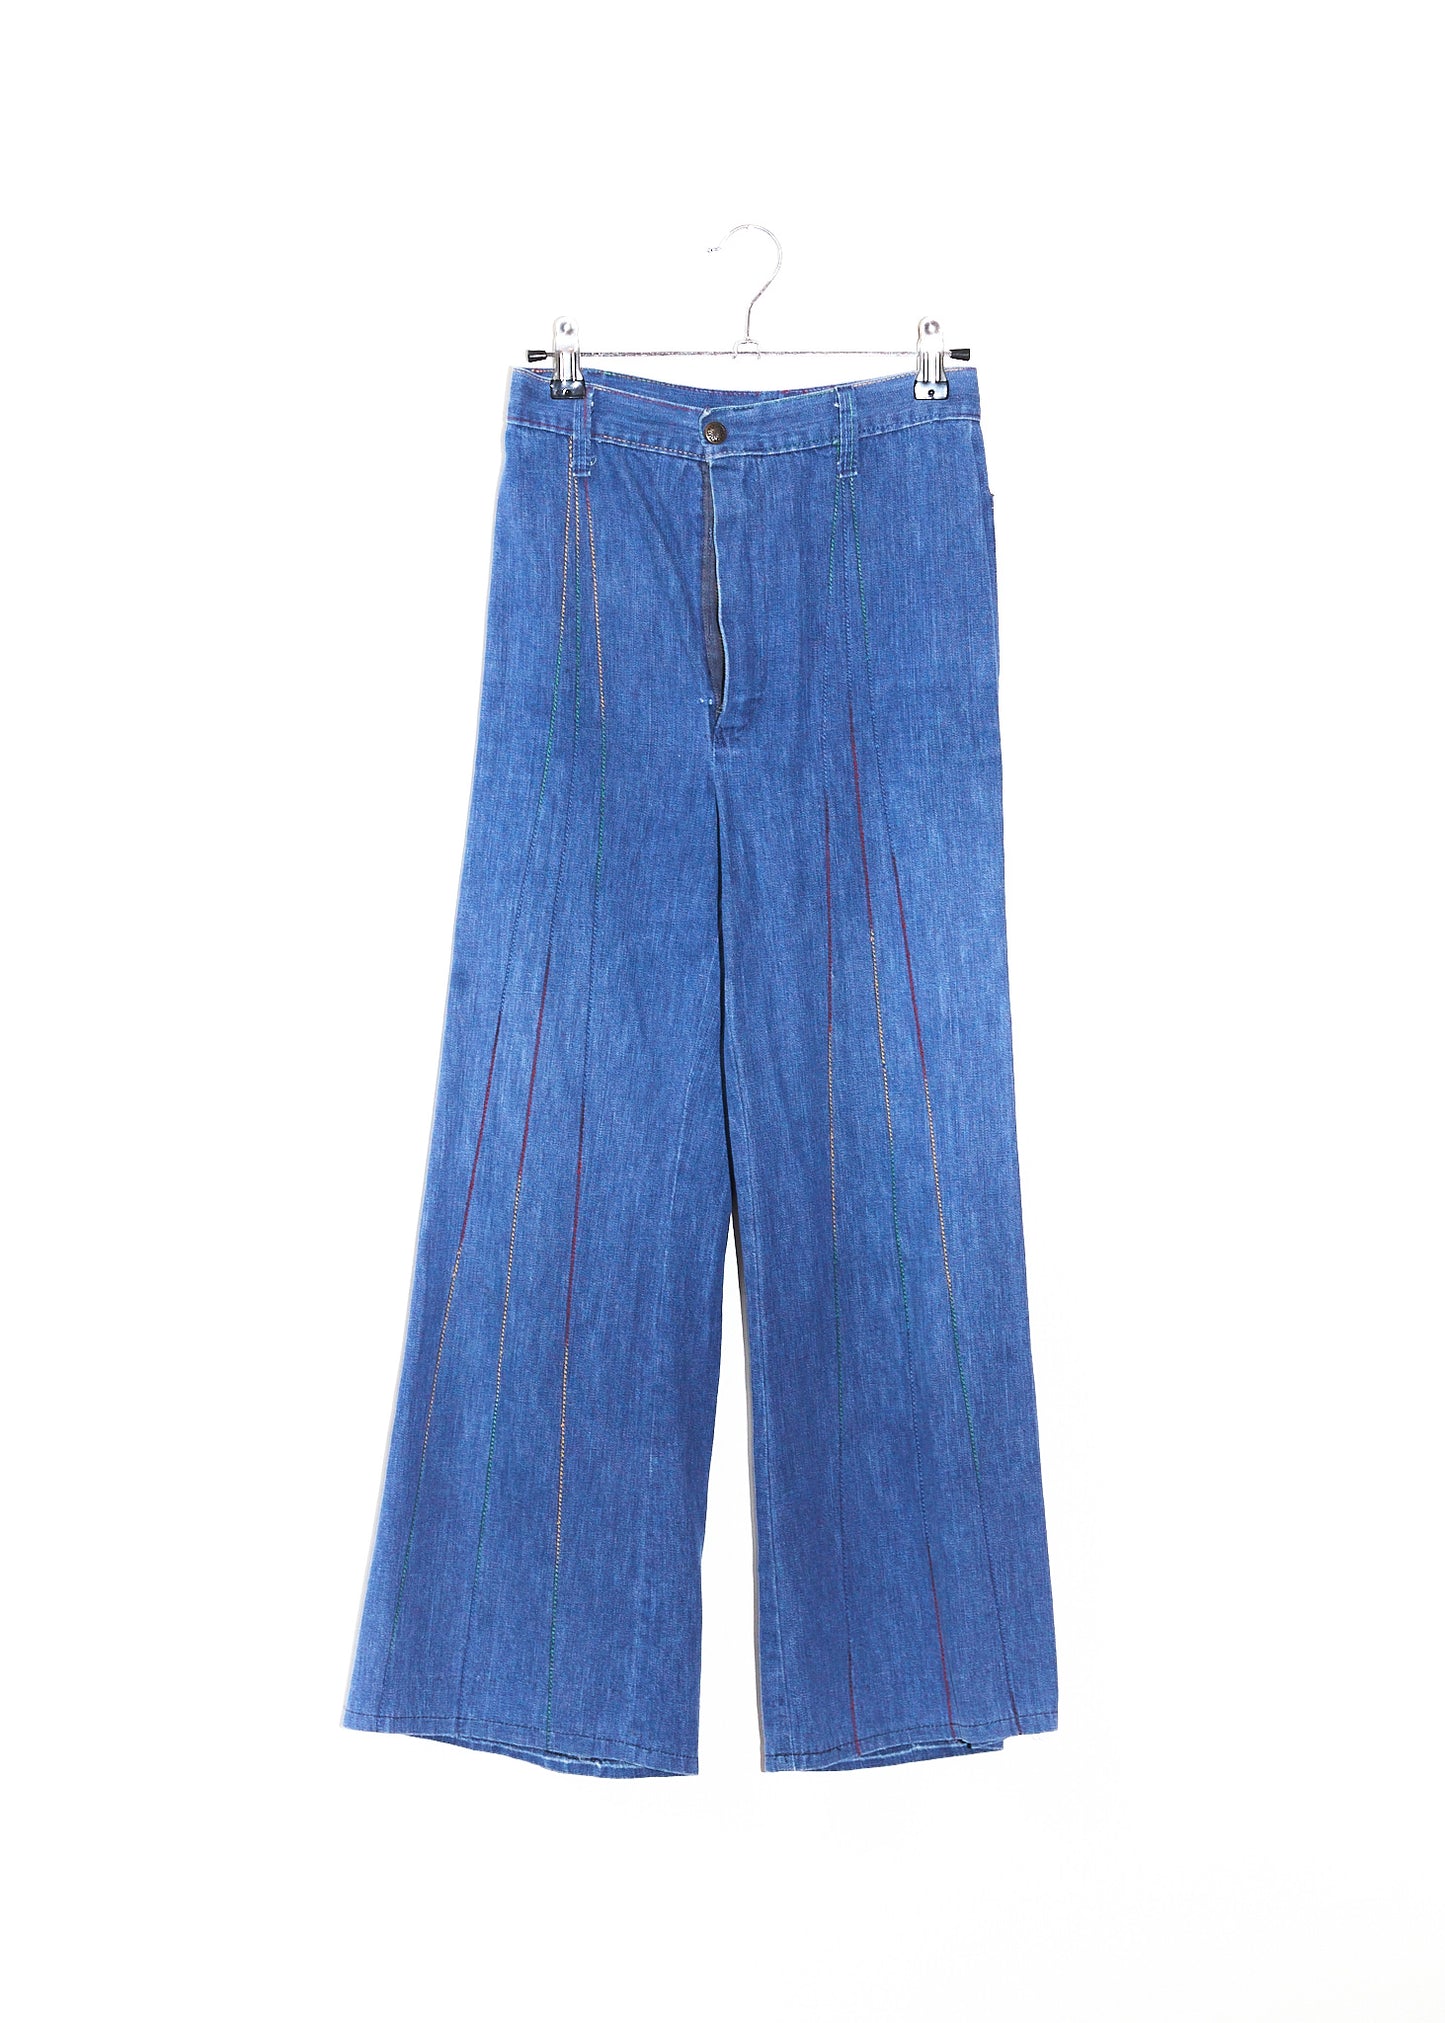 Colored Stitching Jeans